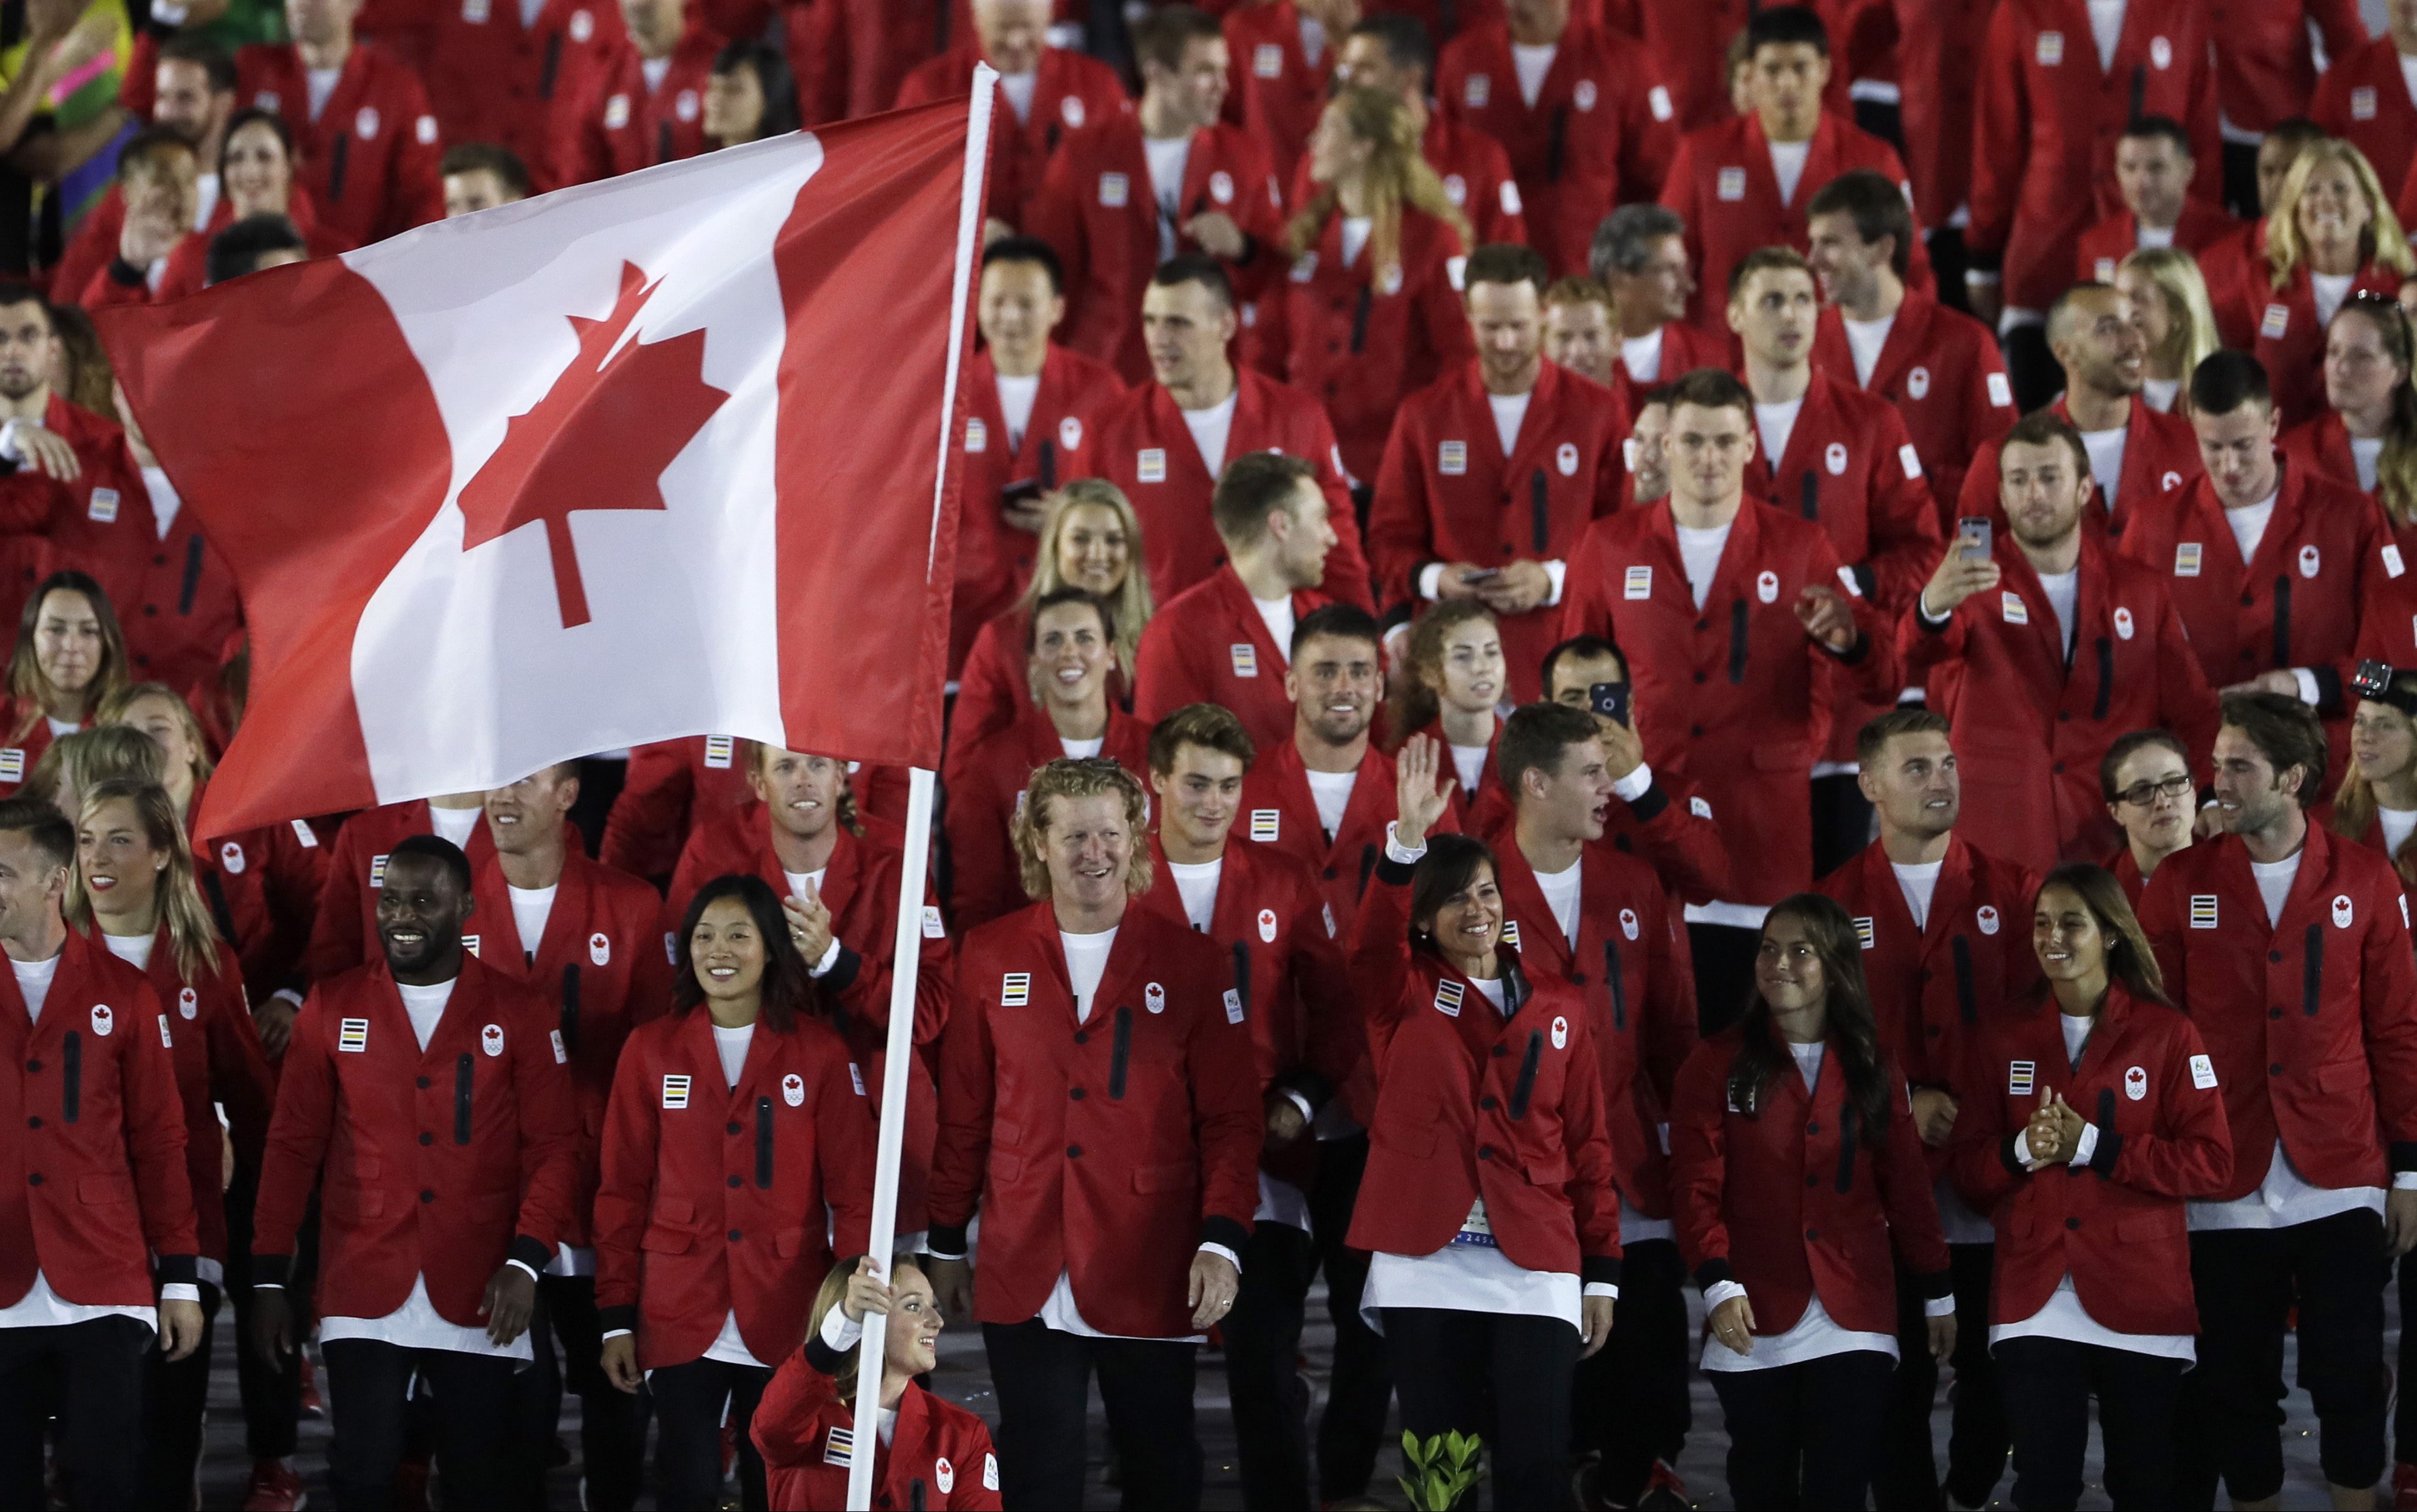 Rosannagh Maclennan carries the flag of Canada during the opening ceremony for the 2016 Summer Olympics in Rio de Janeiro, Brazil, Friday, Aug. 5, 2016. (AP Photo/Matt Slocum)